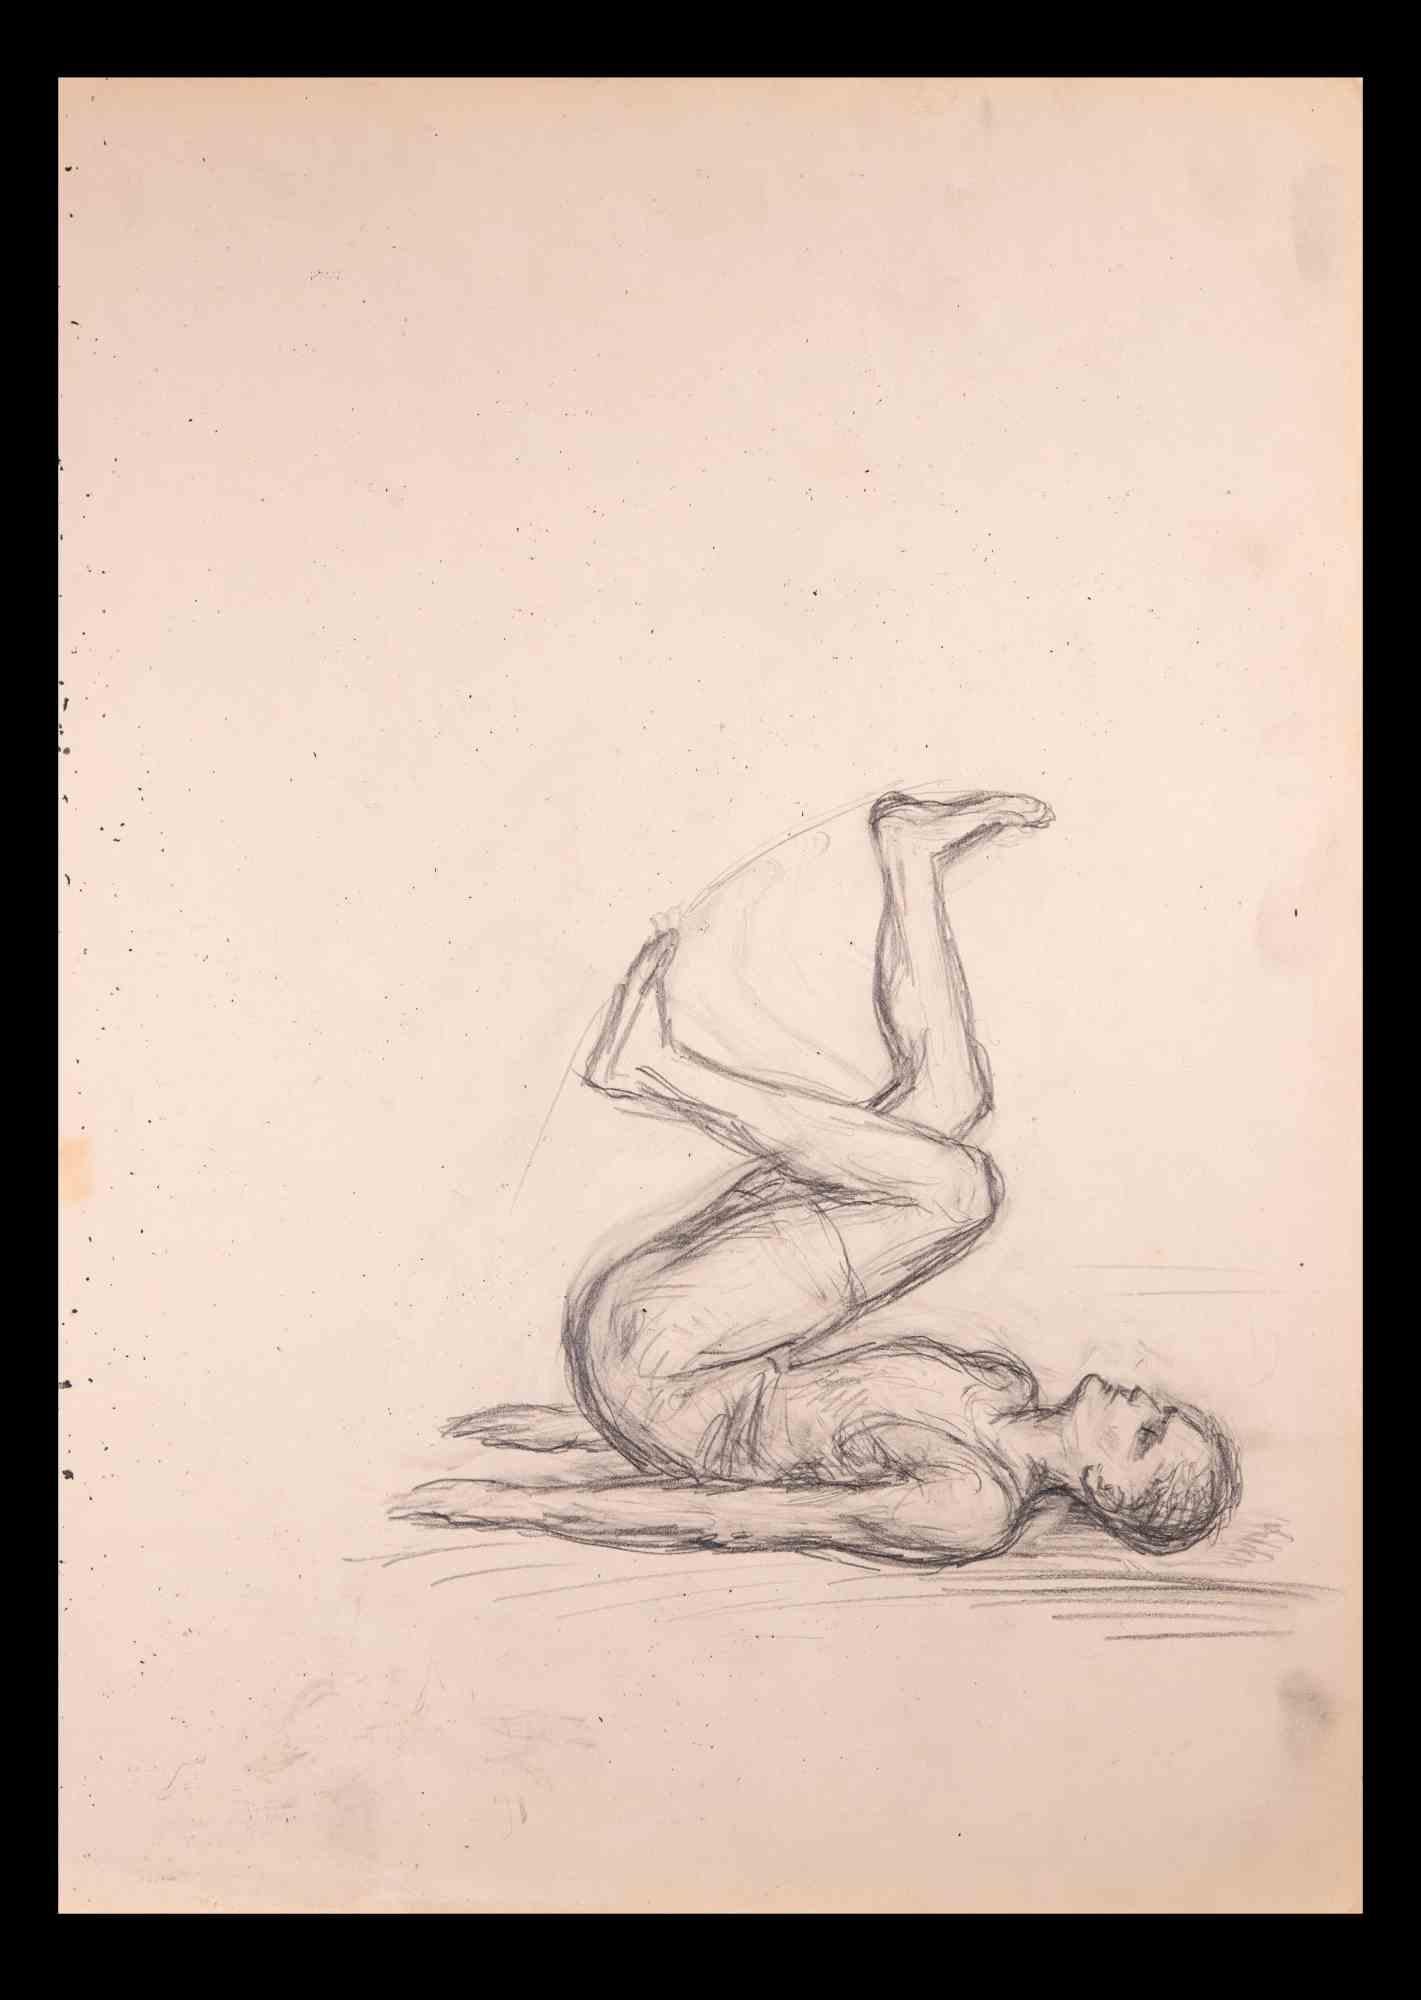 Figure is an original drawing in pencil, on creamy-colored paper realized by Norbert Meyre in the early 20th Century.

Good conditions.

The artwork is depicted through deft strokes by mastery.